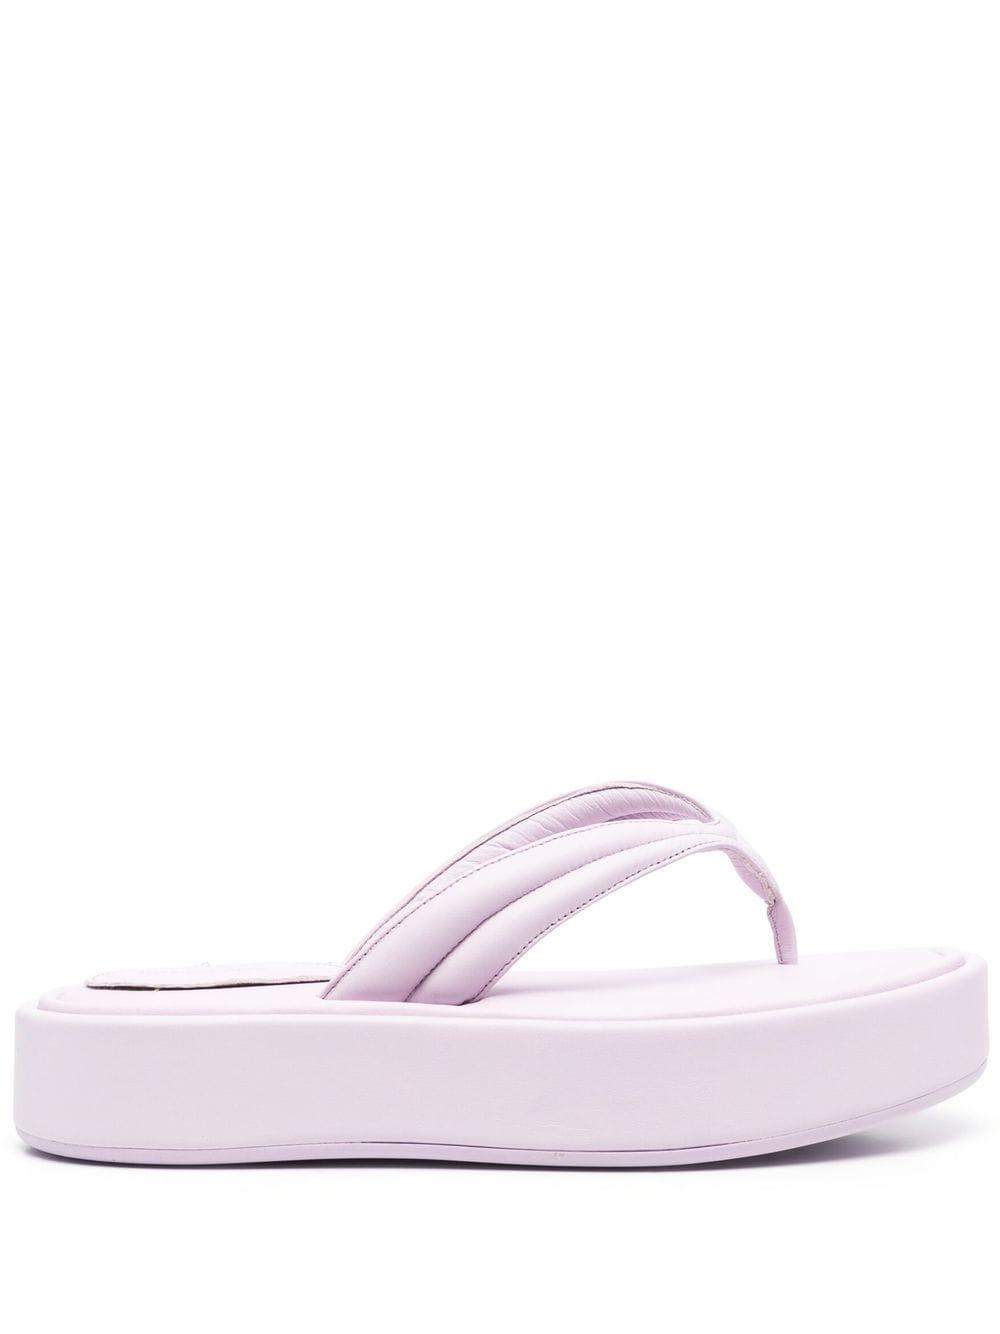 Patrizia Pepe Fly Flatform Thong-strap Sandals in White | Lyst